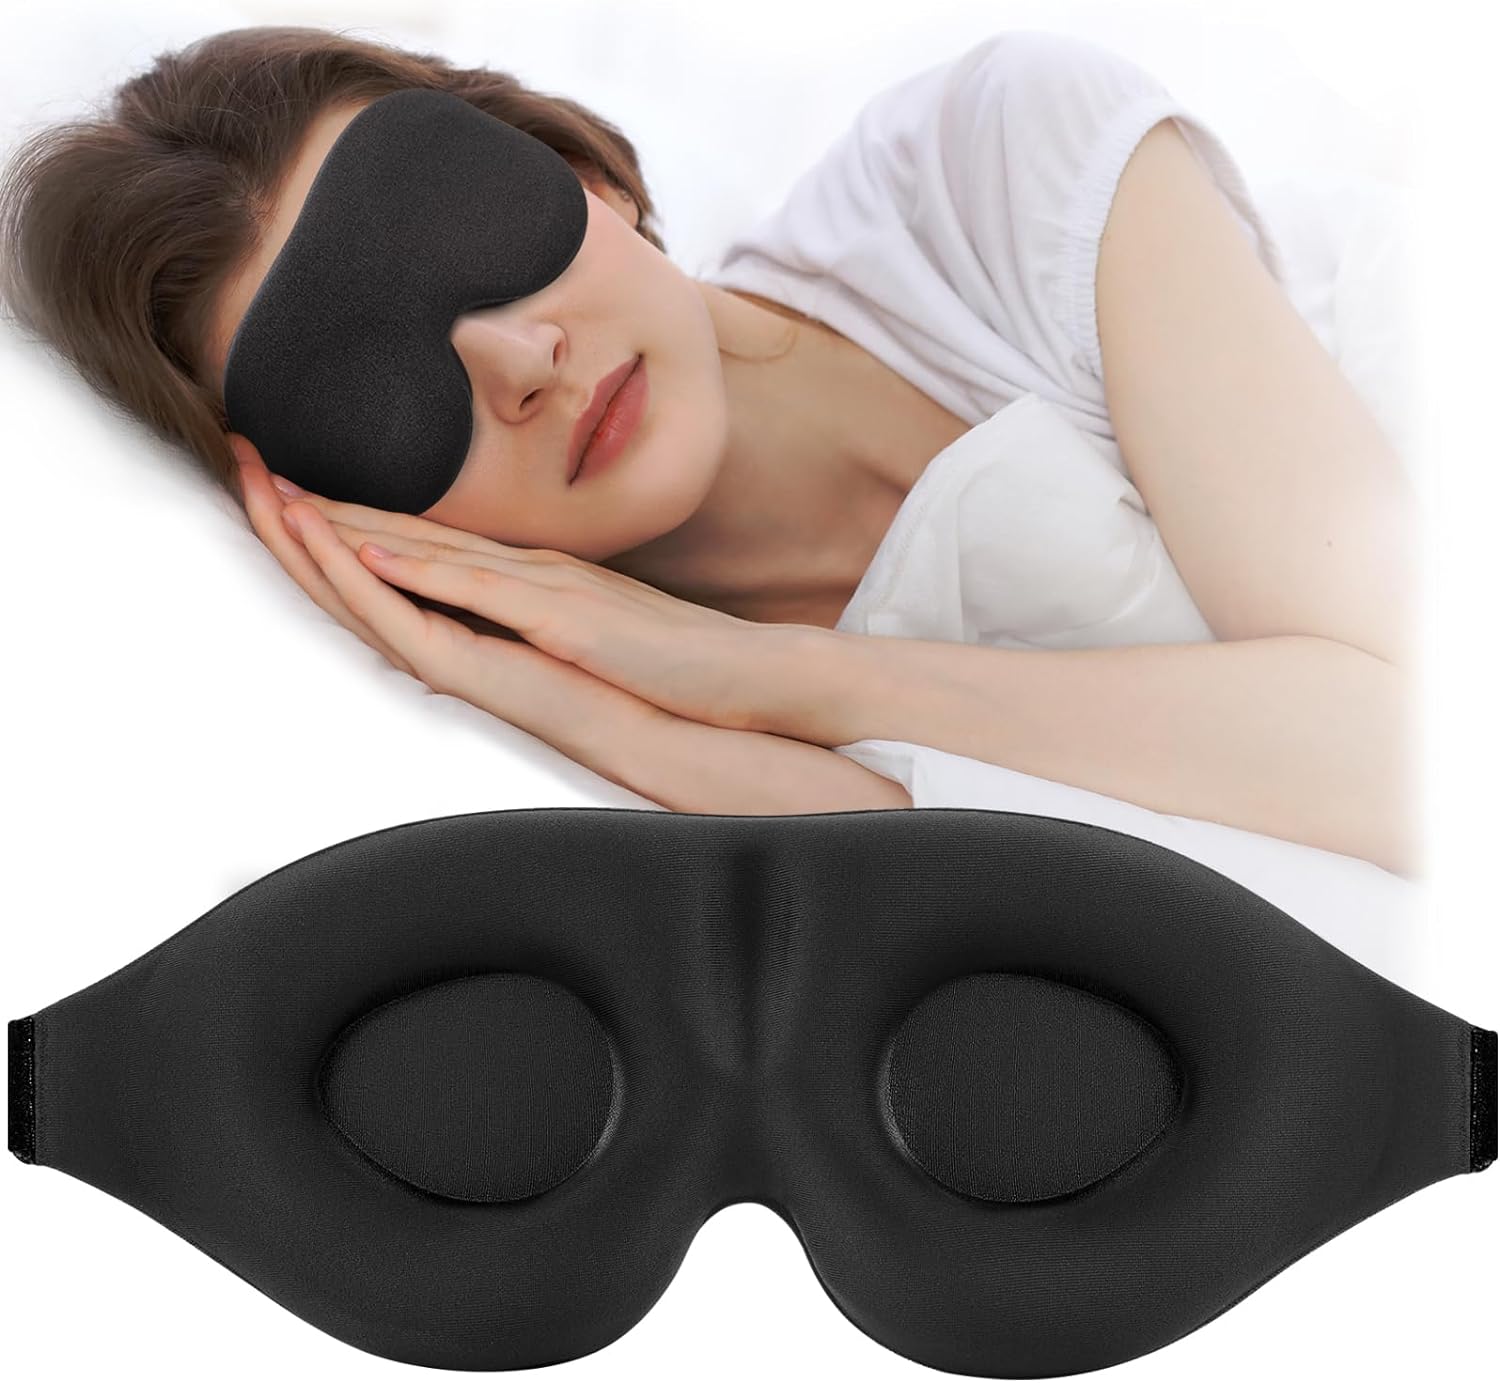 This is the best eye mask EVER. Ive tried many and this is by far the most effective one Ive ever used. Its very comfortable and it blocks out every bit of light. I HIGHLY recommend it. Sweet dreams.